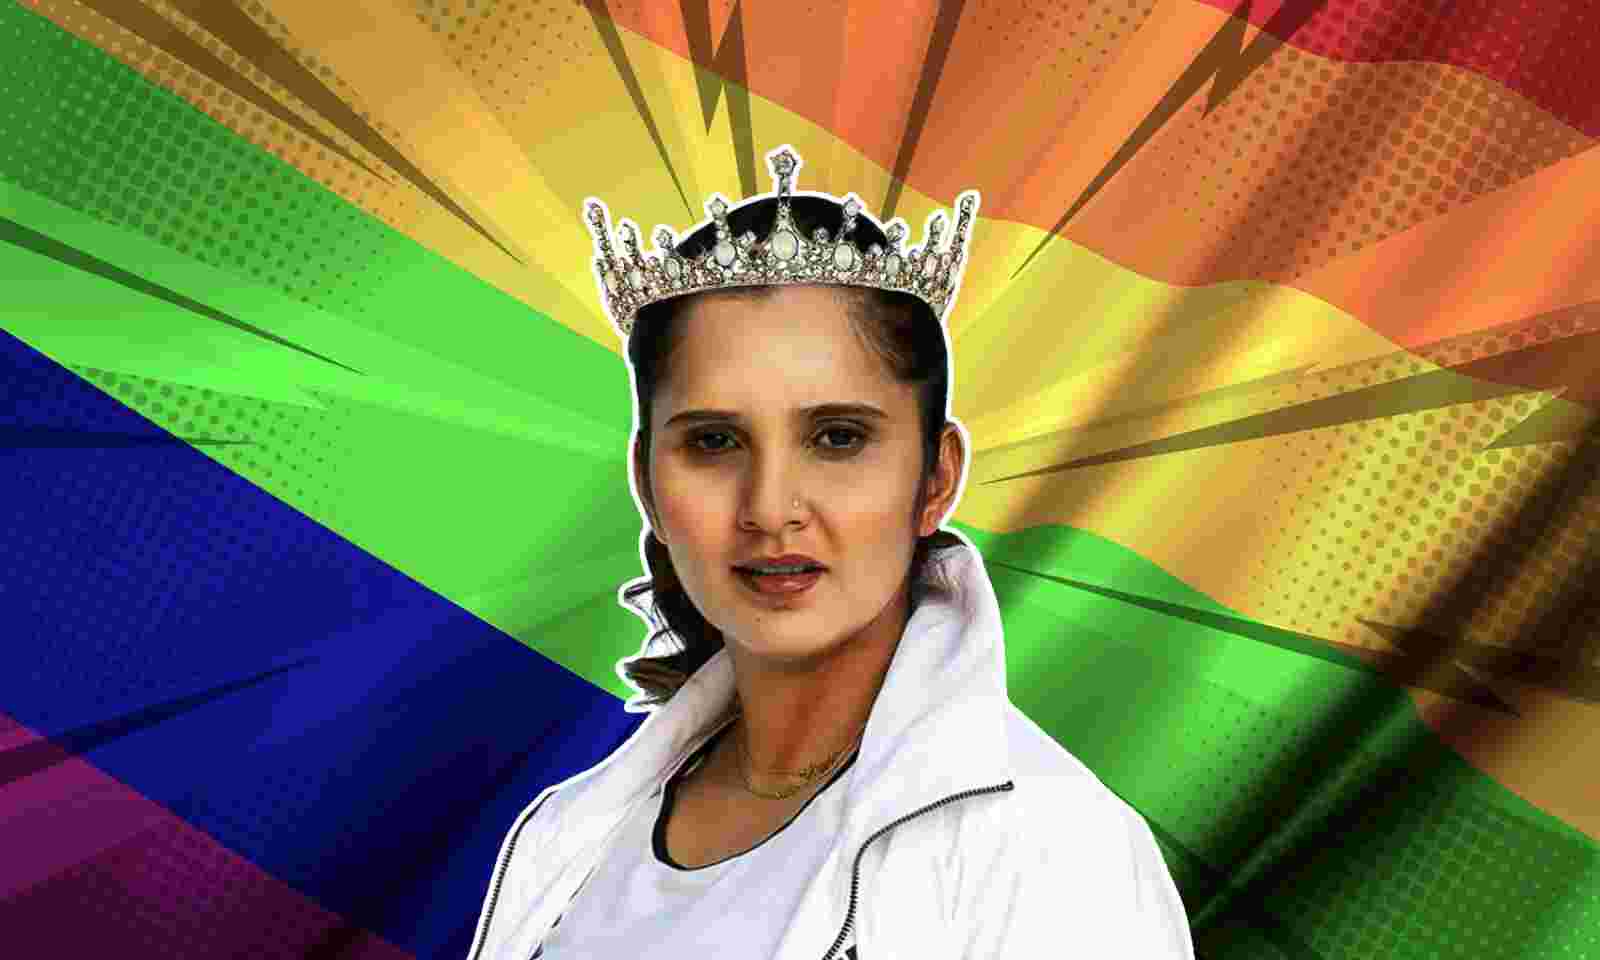 When a rebel was born: Celebrating Sania Mirza, my queer-feminist icon